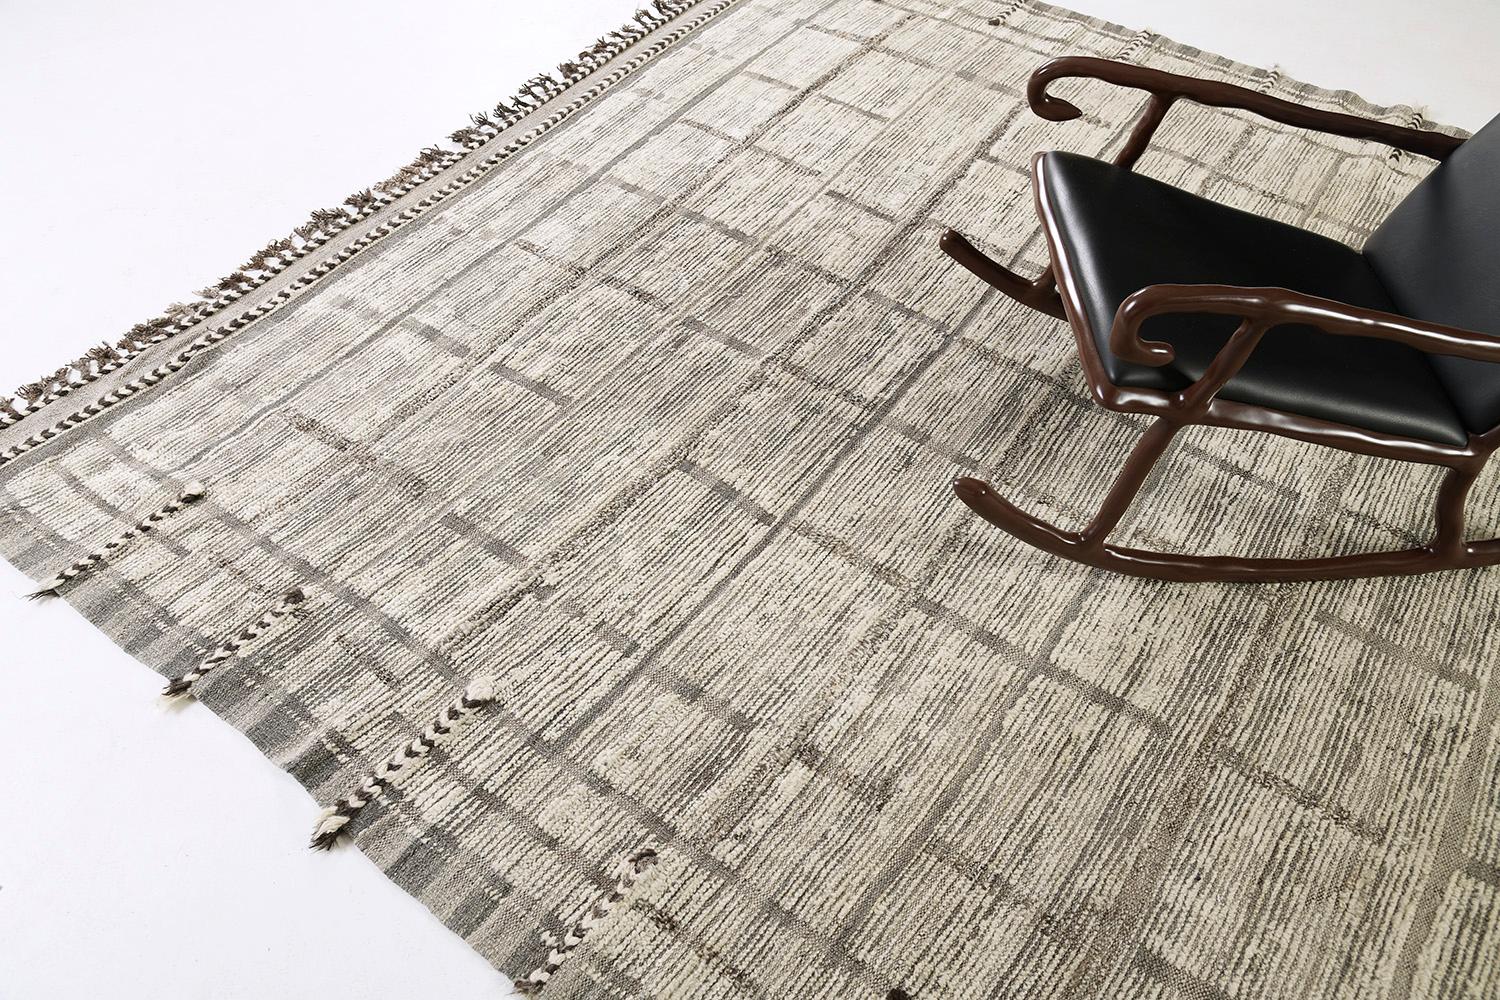 Oujda is a handwoven luxurious wool rug with timeless embossed detailing. In addition to its excellent pile weave, Oujda has a lovely design that brings a lustrous texture and contemporary feel to one's space. Mehraban's Atlas collection is noted